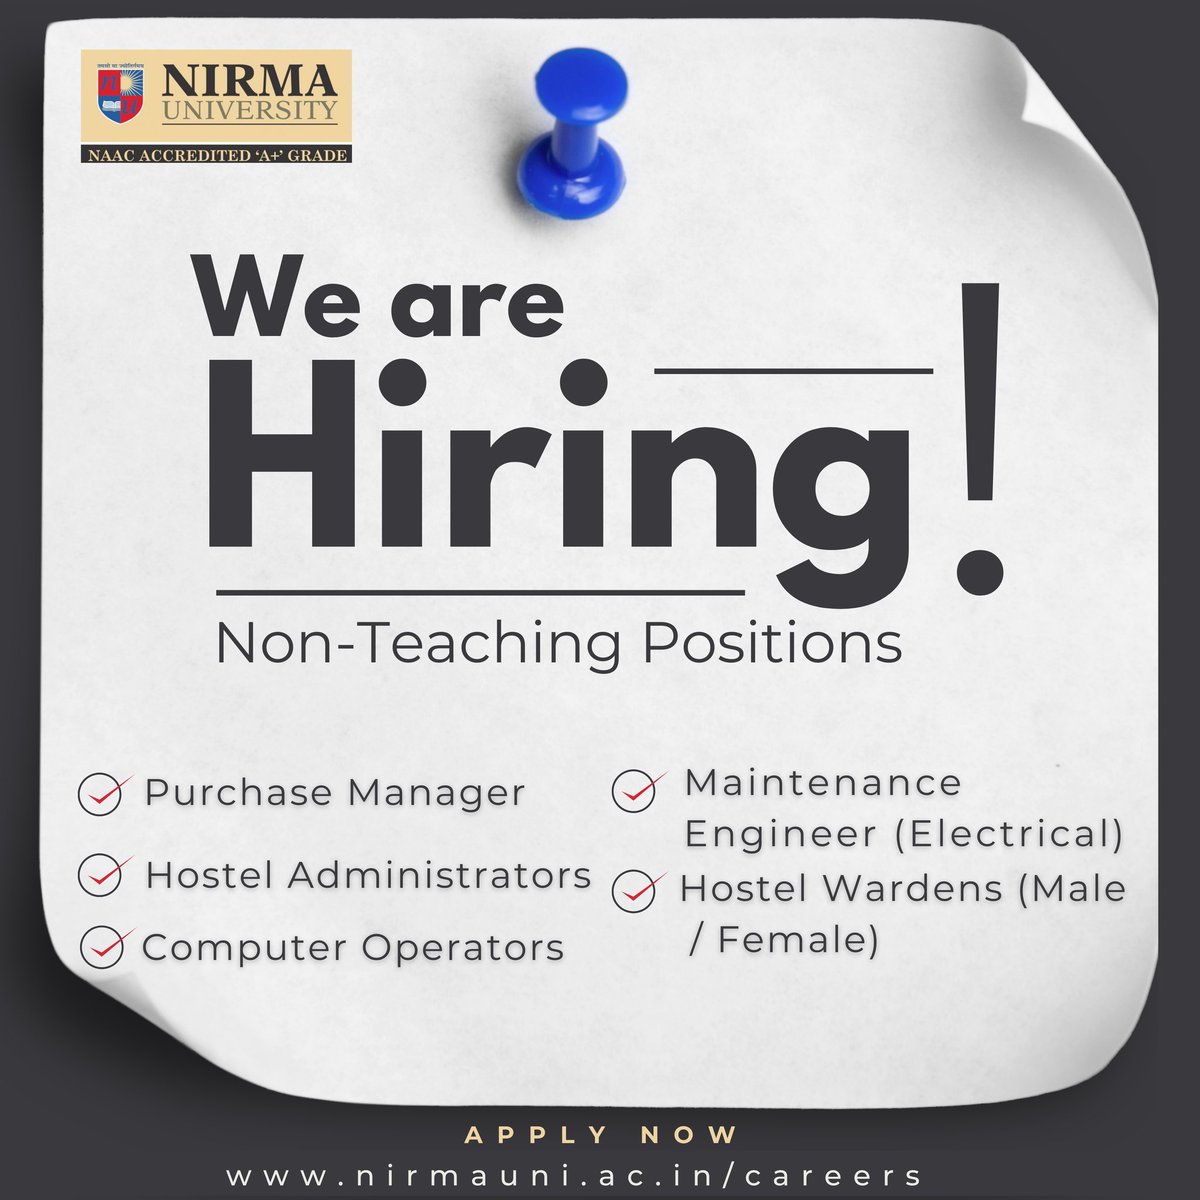 Nirma University invites applications for various non-teaching positions. Join us and contribute to our mission of academic excellence. Apply online at nirmauni.ac.in/careers #NirmaUniversity #NonTeachingRoles #CareerOpportunities #Hiring #JoinUs #Career #NirmaUni